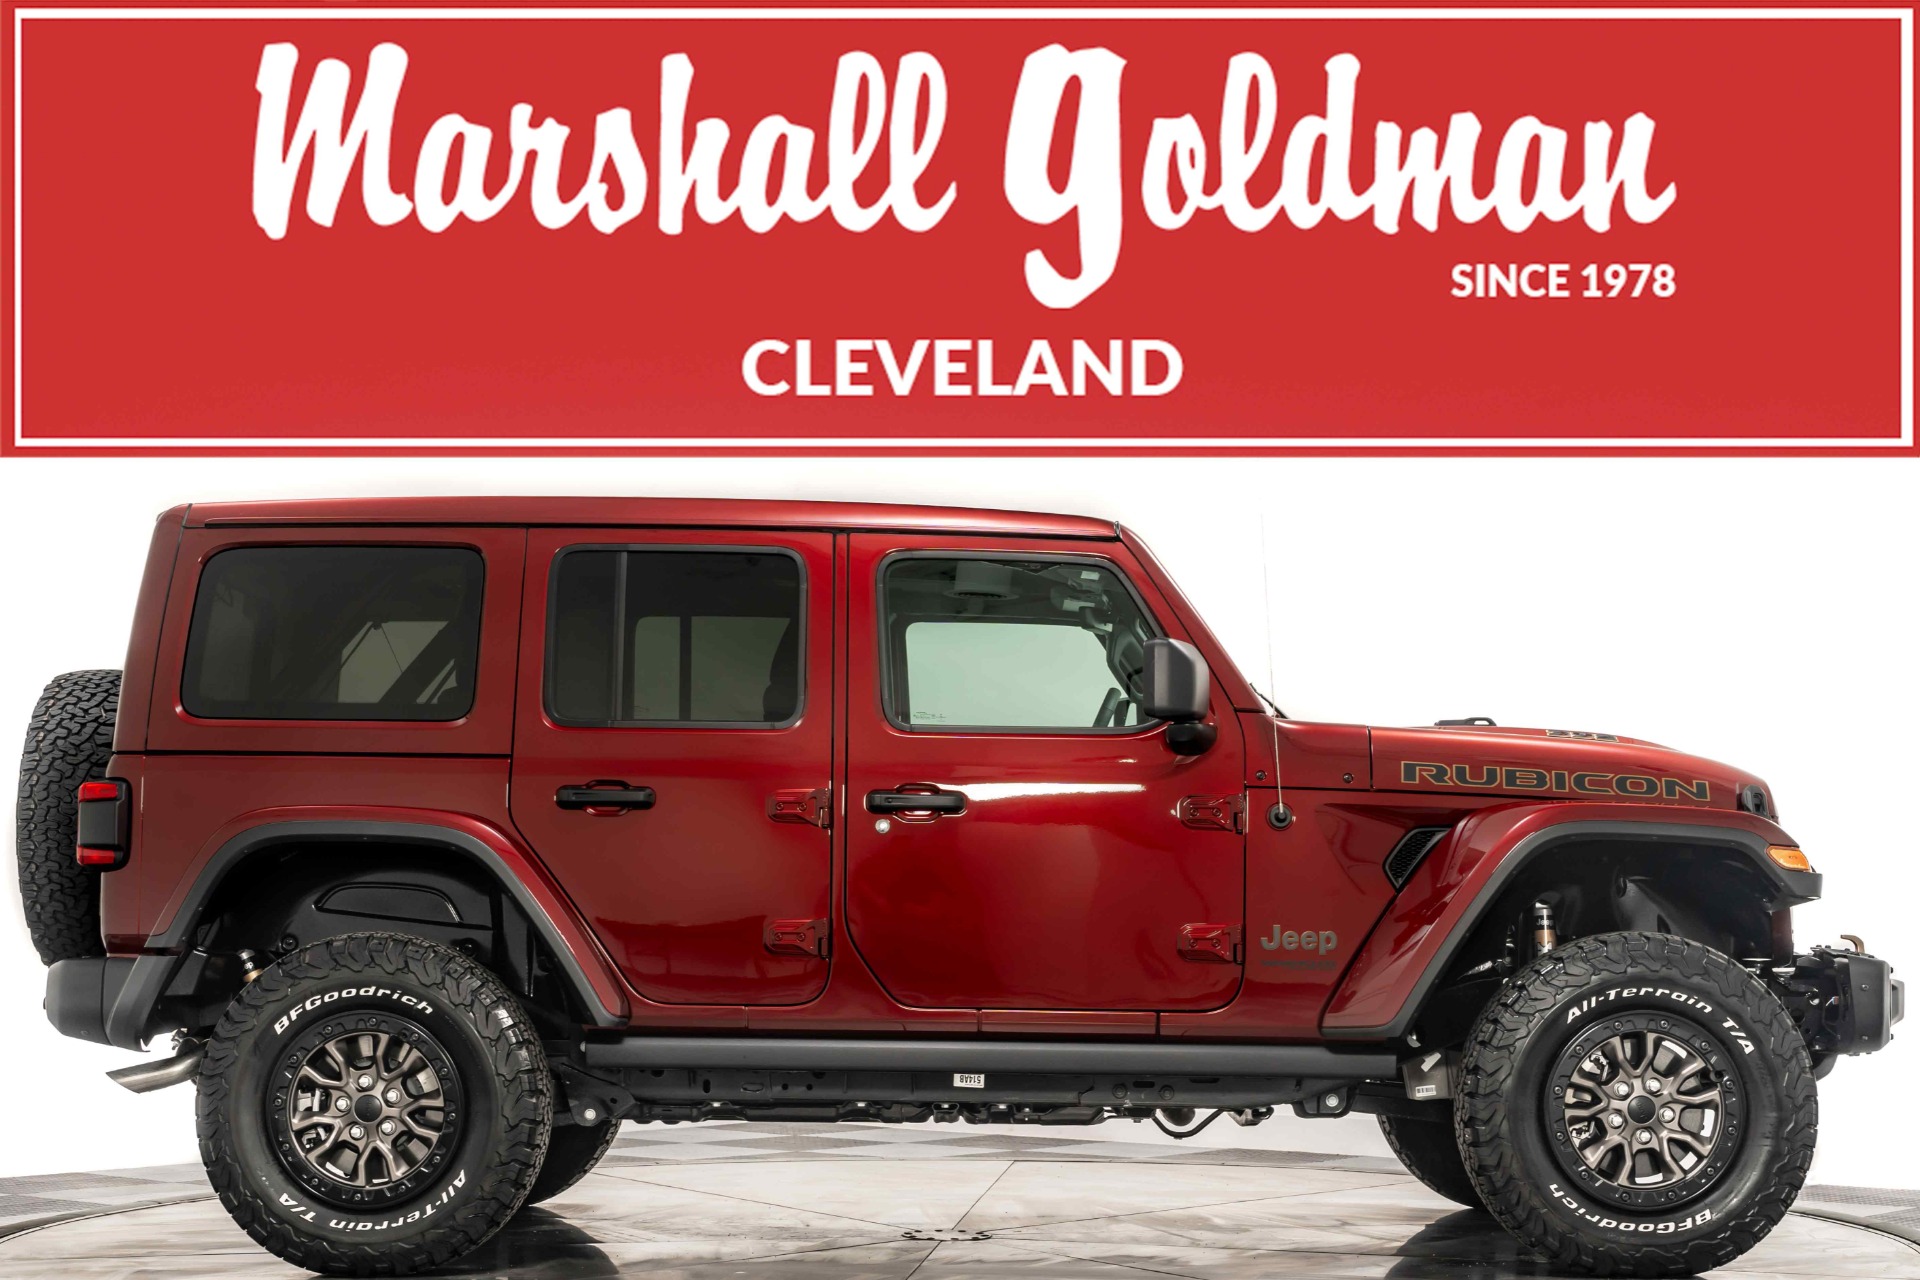 Used 2021 Jeep Wrangler Unlimited Rubicon 392 For Sale ($84,900) | Marshall  Goldman Cleveland Stock #WJC392R